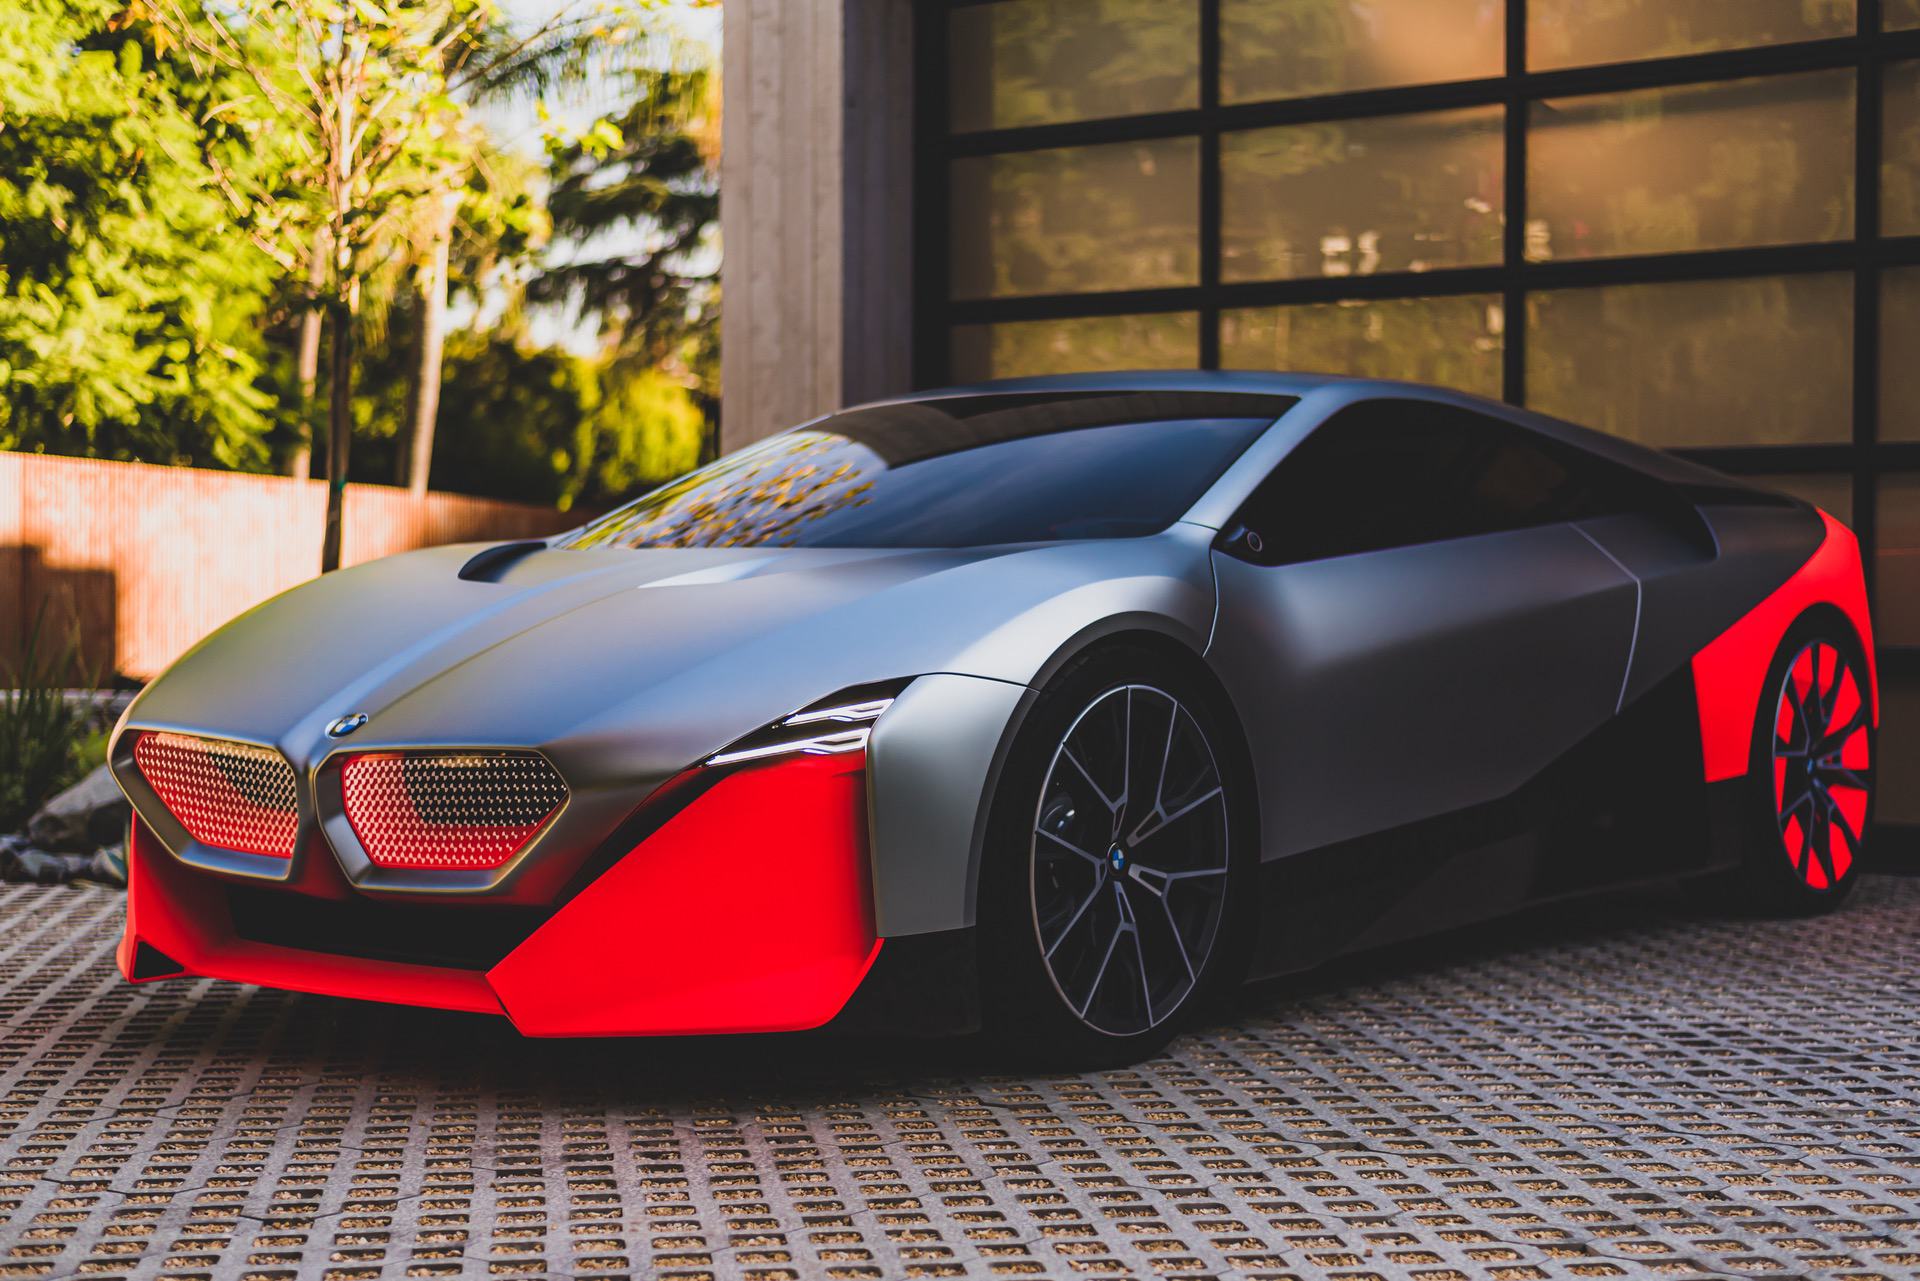 Bmw Vision M Next Wallpapers